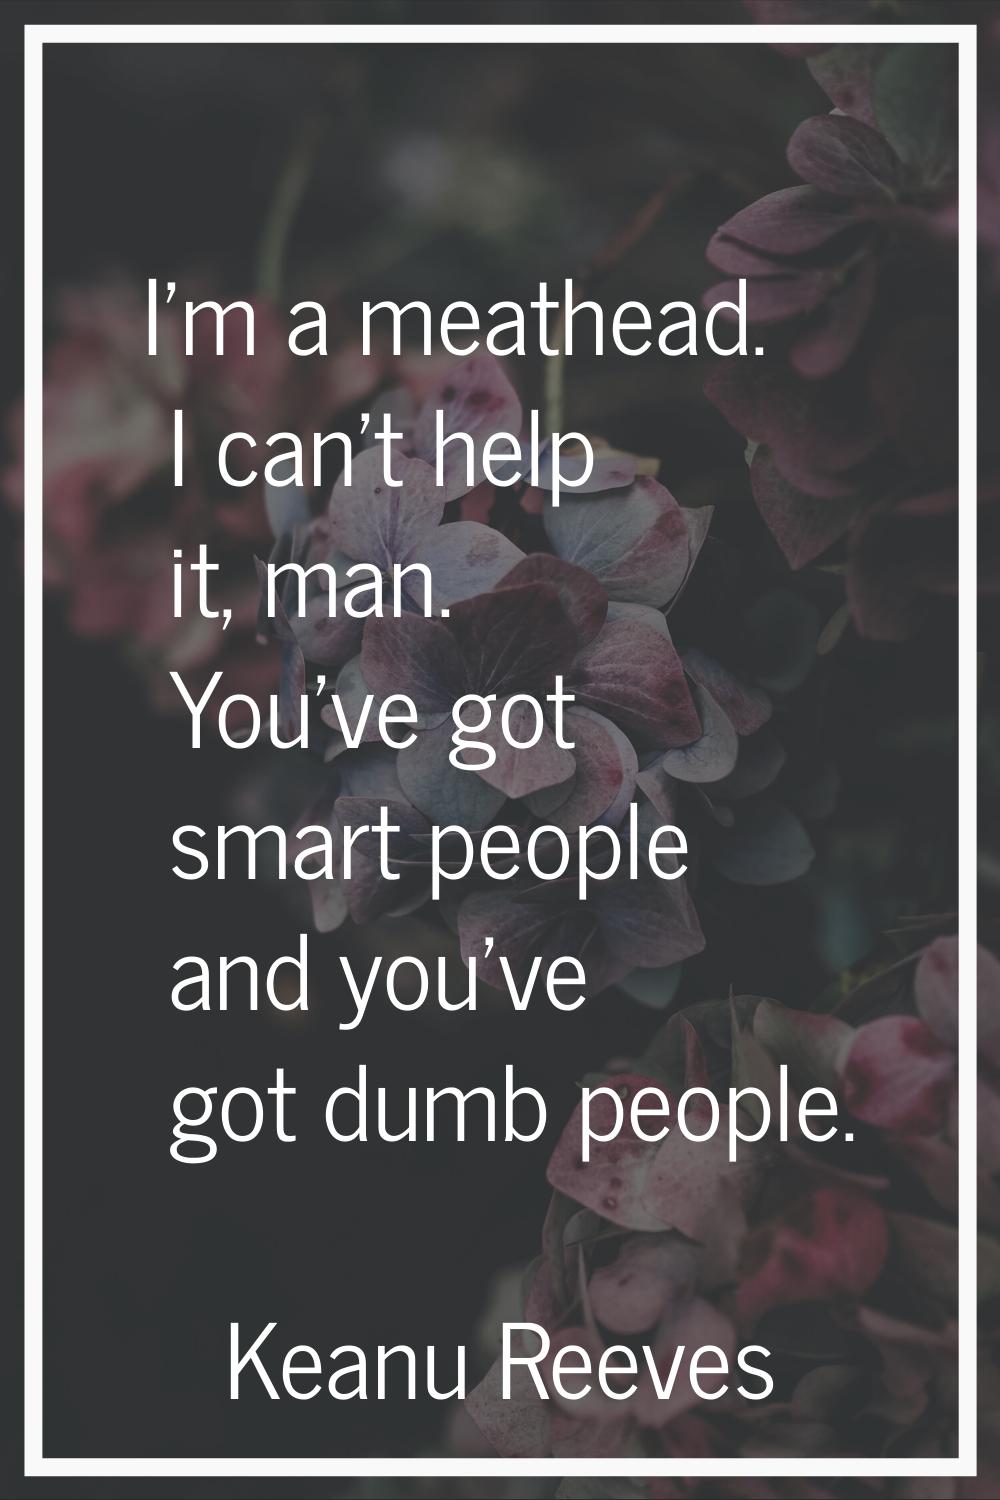 I'm a meathead. I can't help it, man. You've got smart people and you've got dumb people.